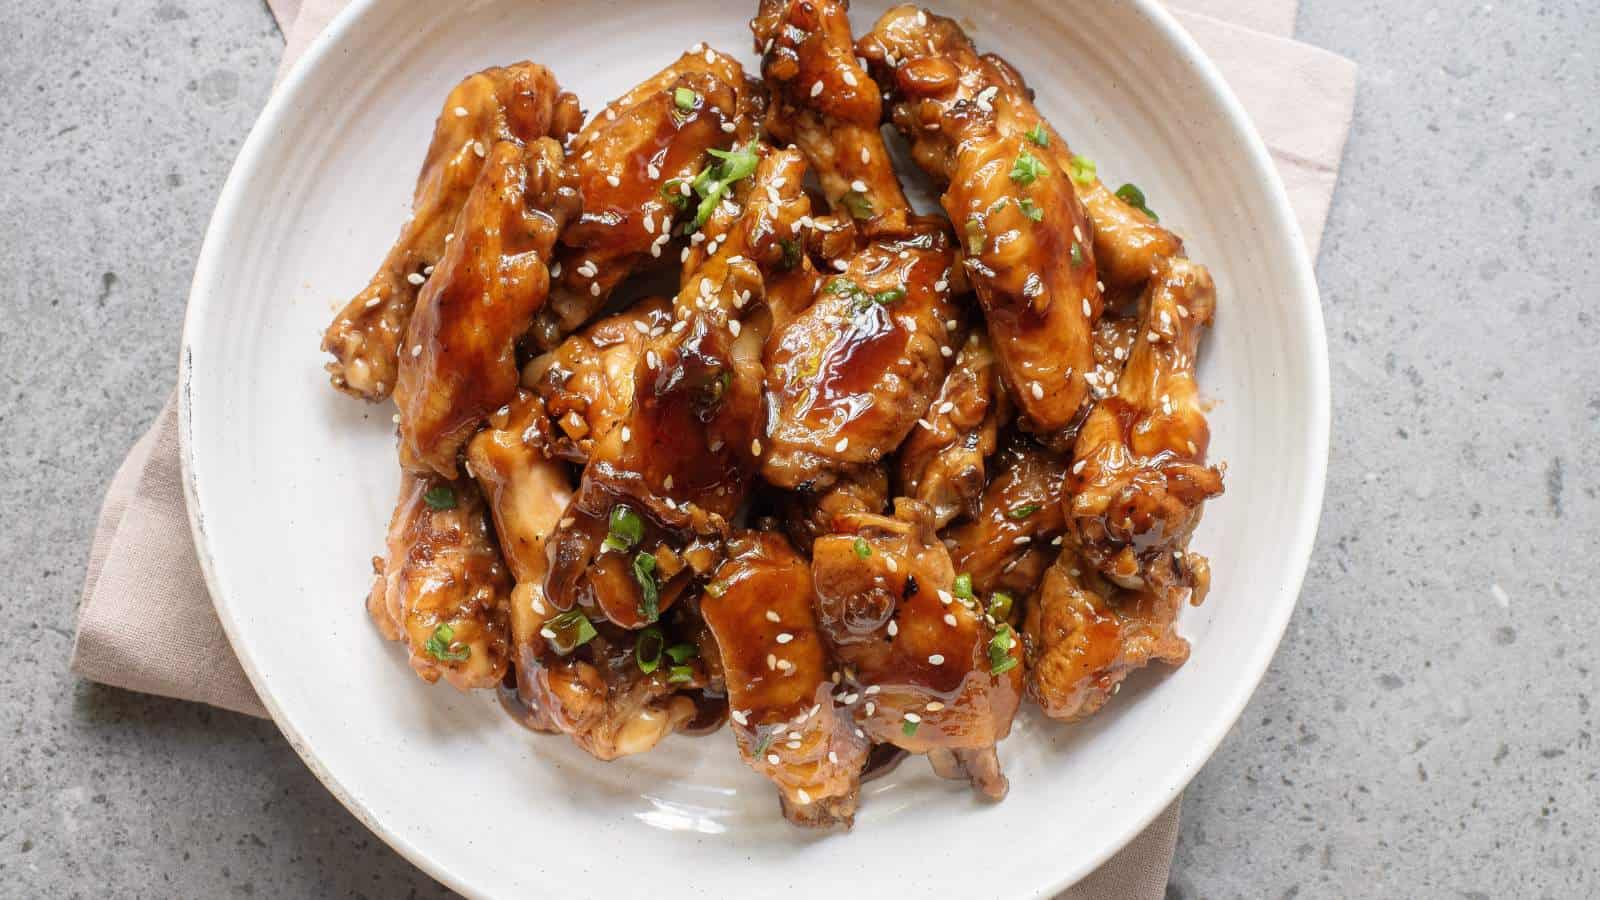 A white plate with glazed chicken wings garnished with chopped green onions and sesame seeds, placed on a gray surface.